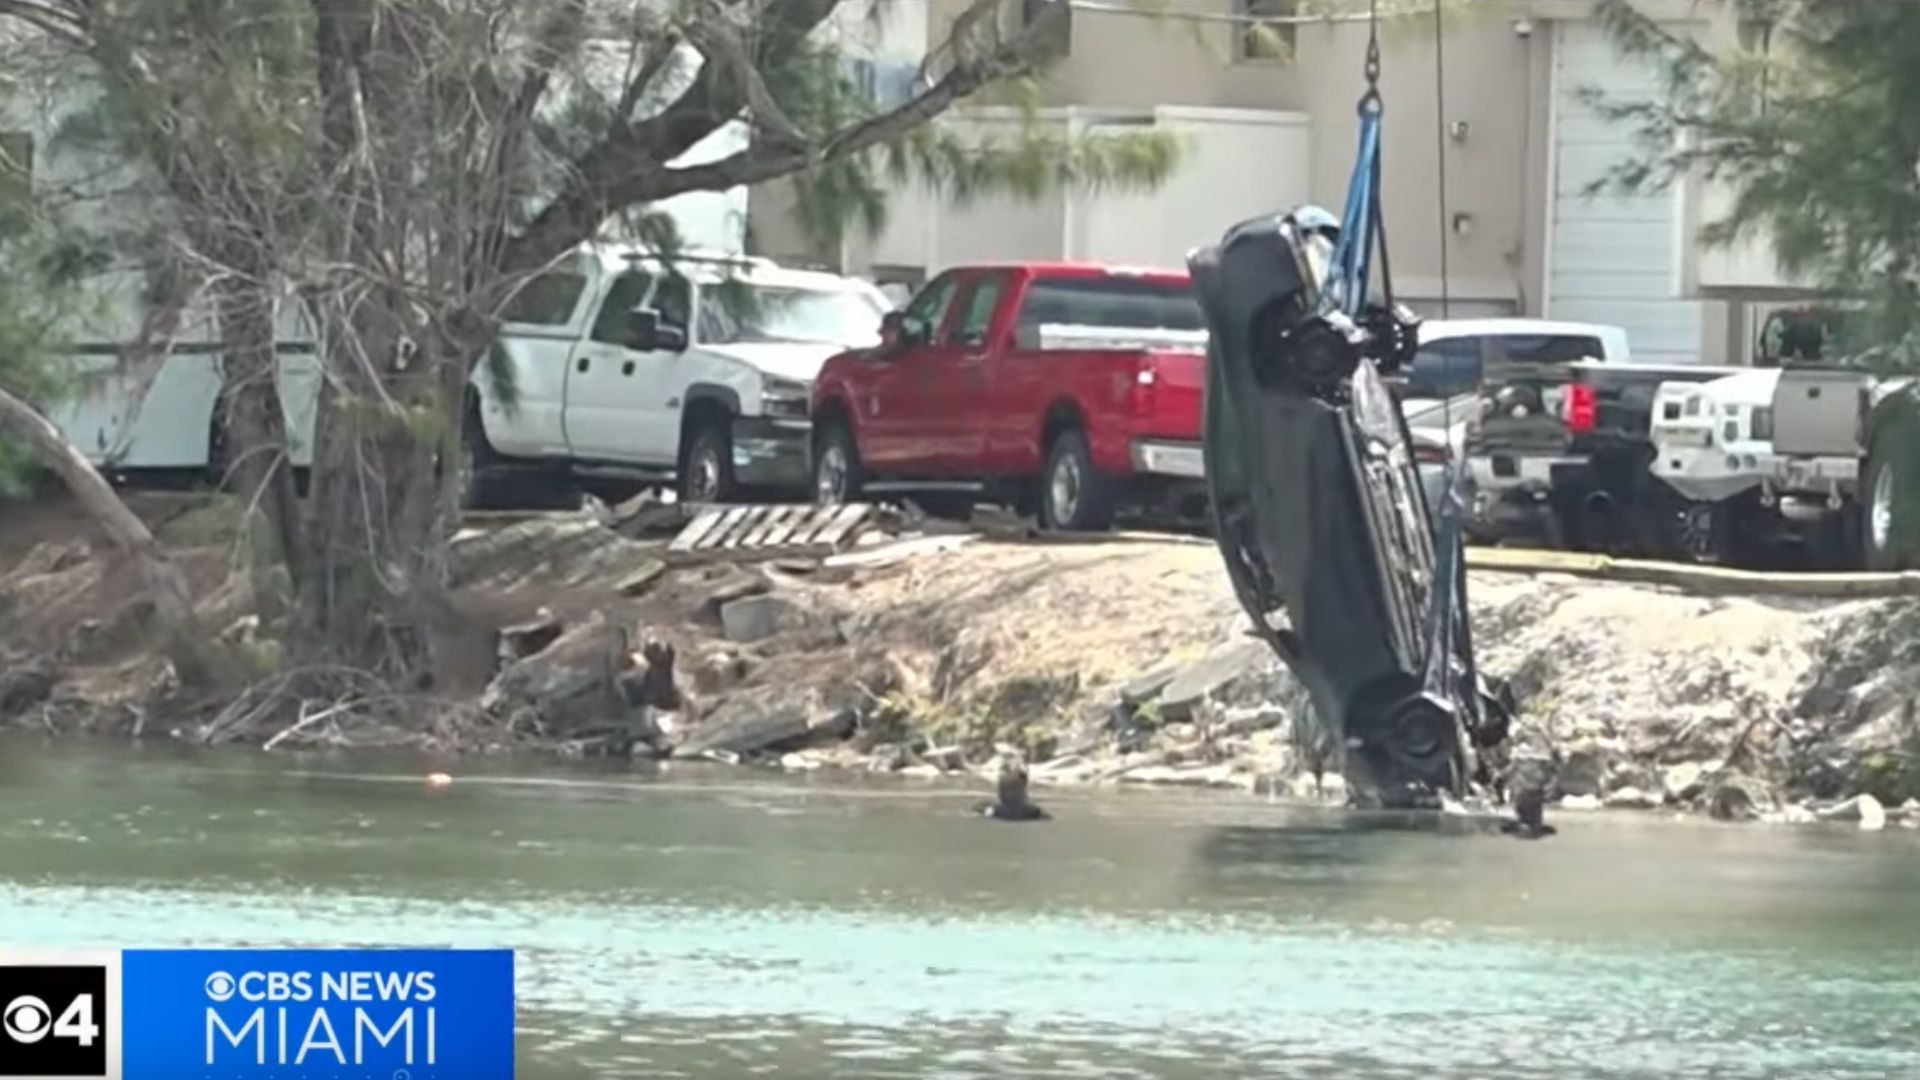 Are Florida Lakes Just Loaded With Dumped Cars?